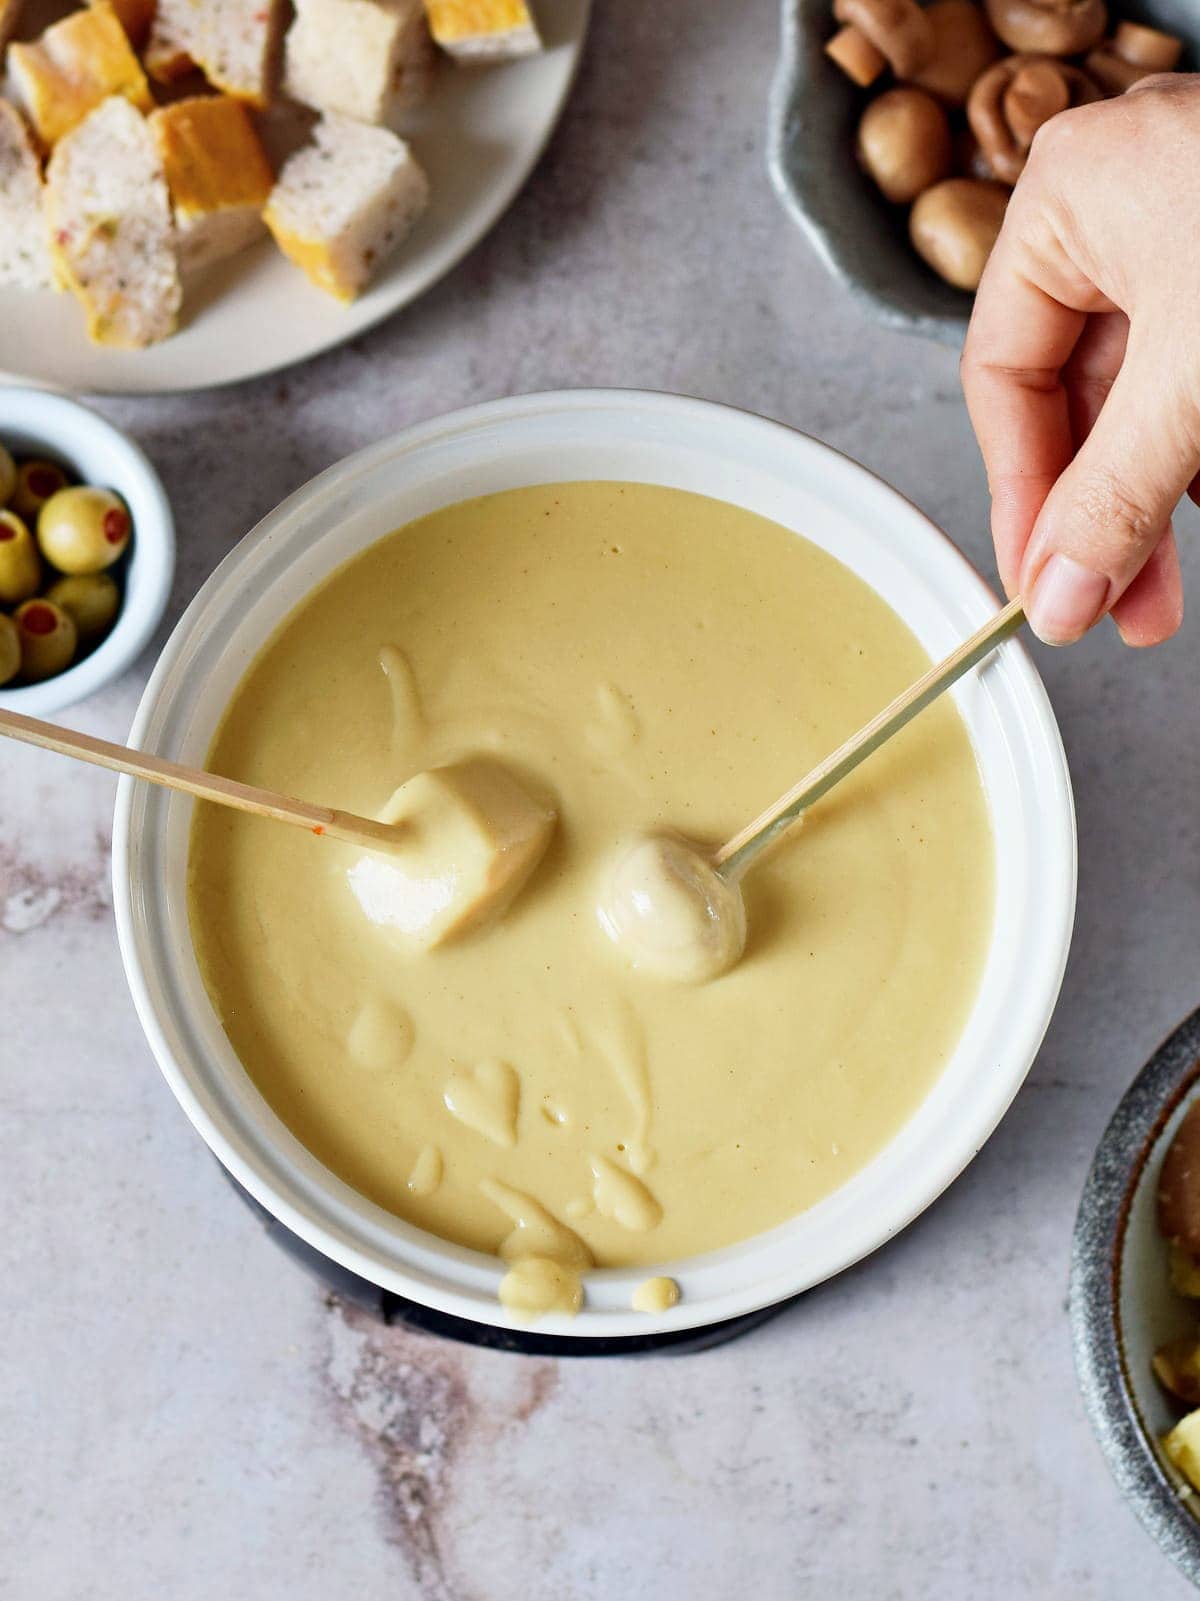 dipping bread in dairy-free cheese sauce